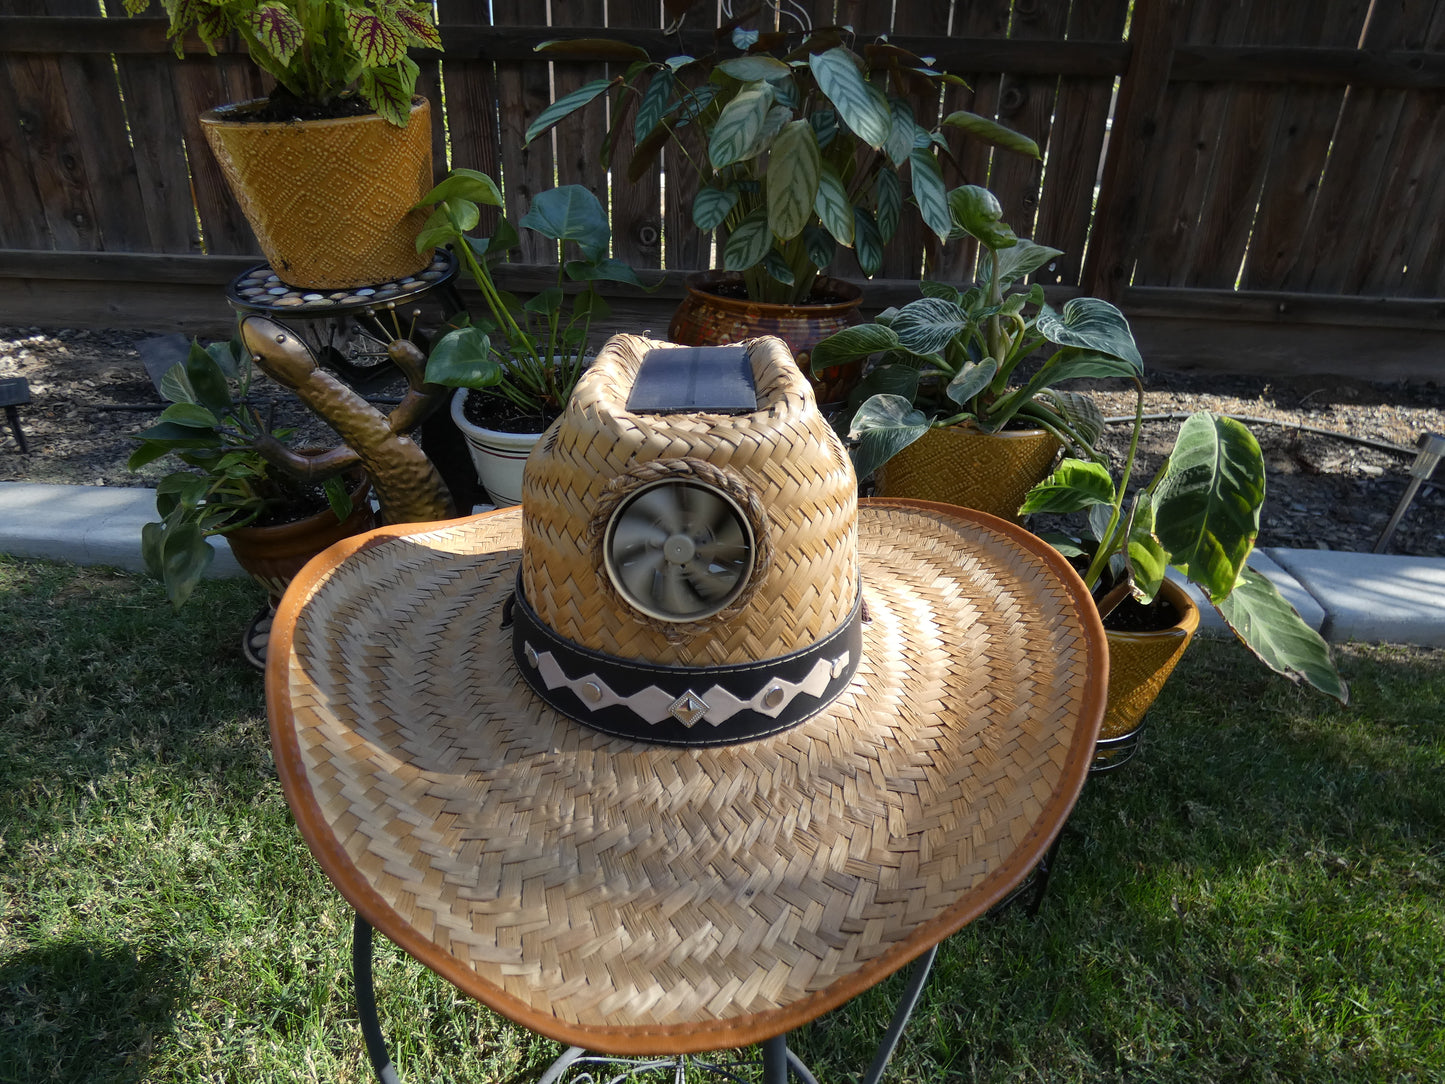 Men's Cowboy with Band Solar Hat